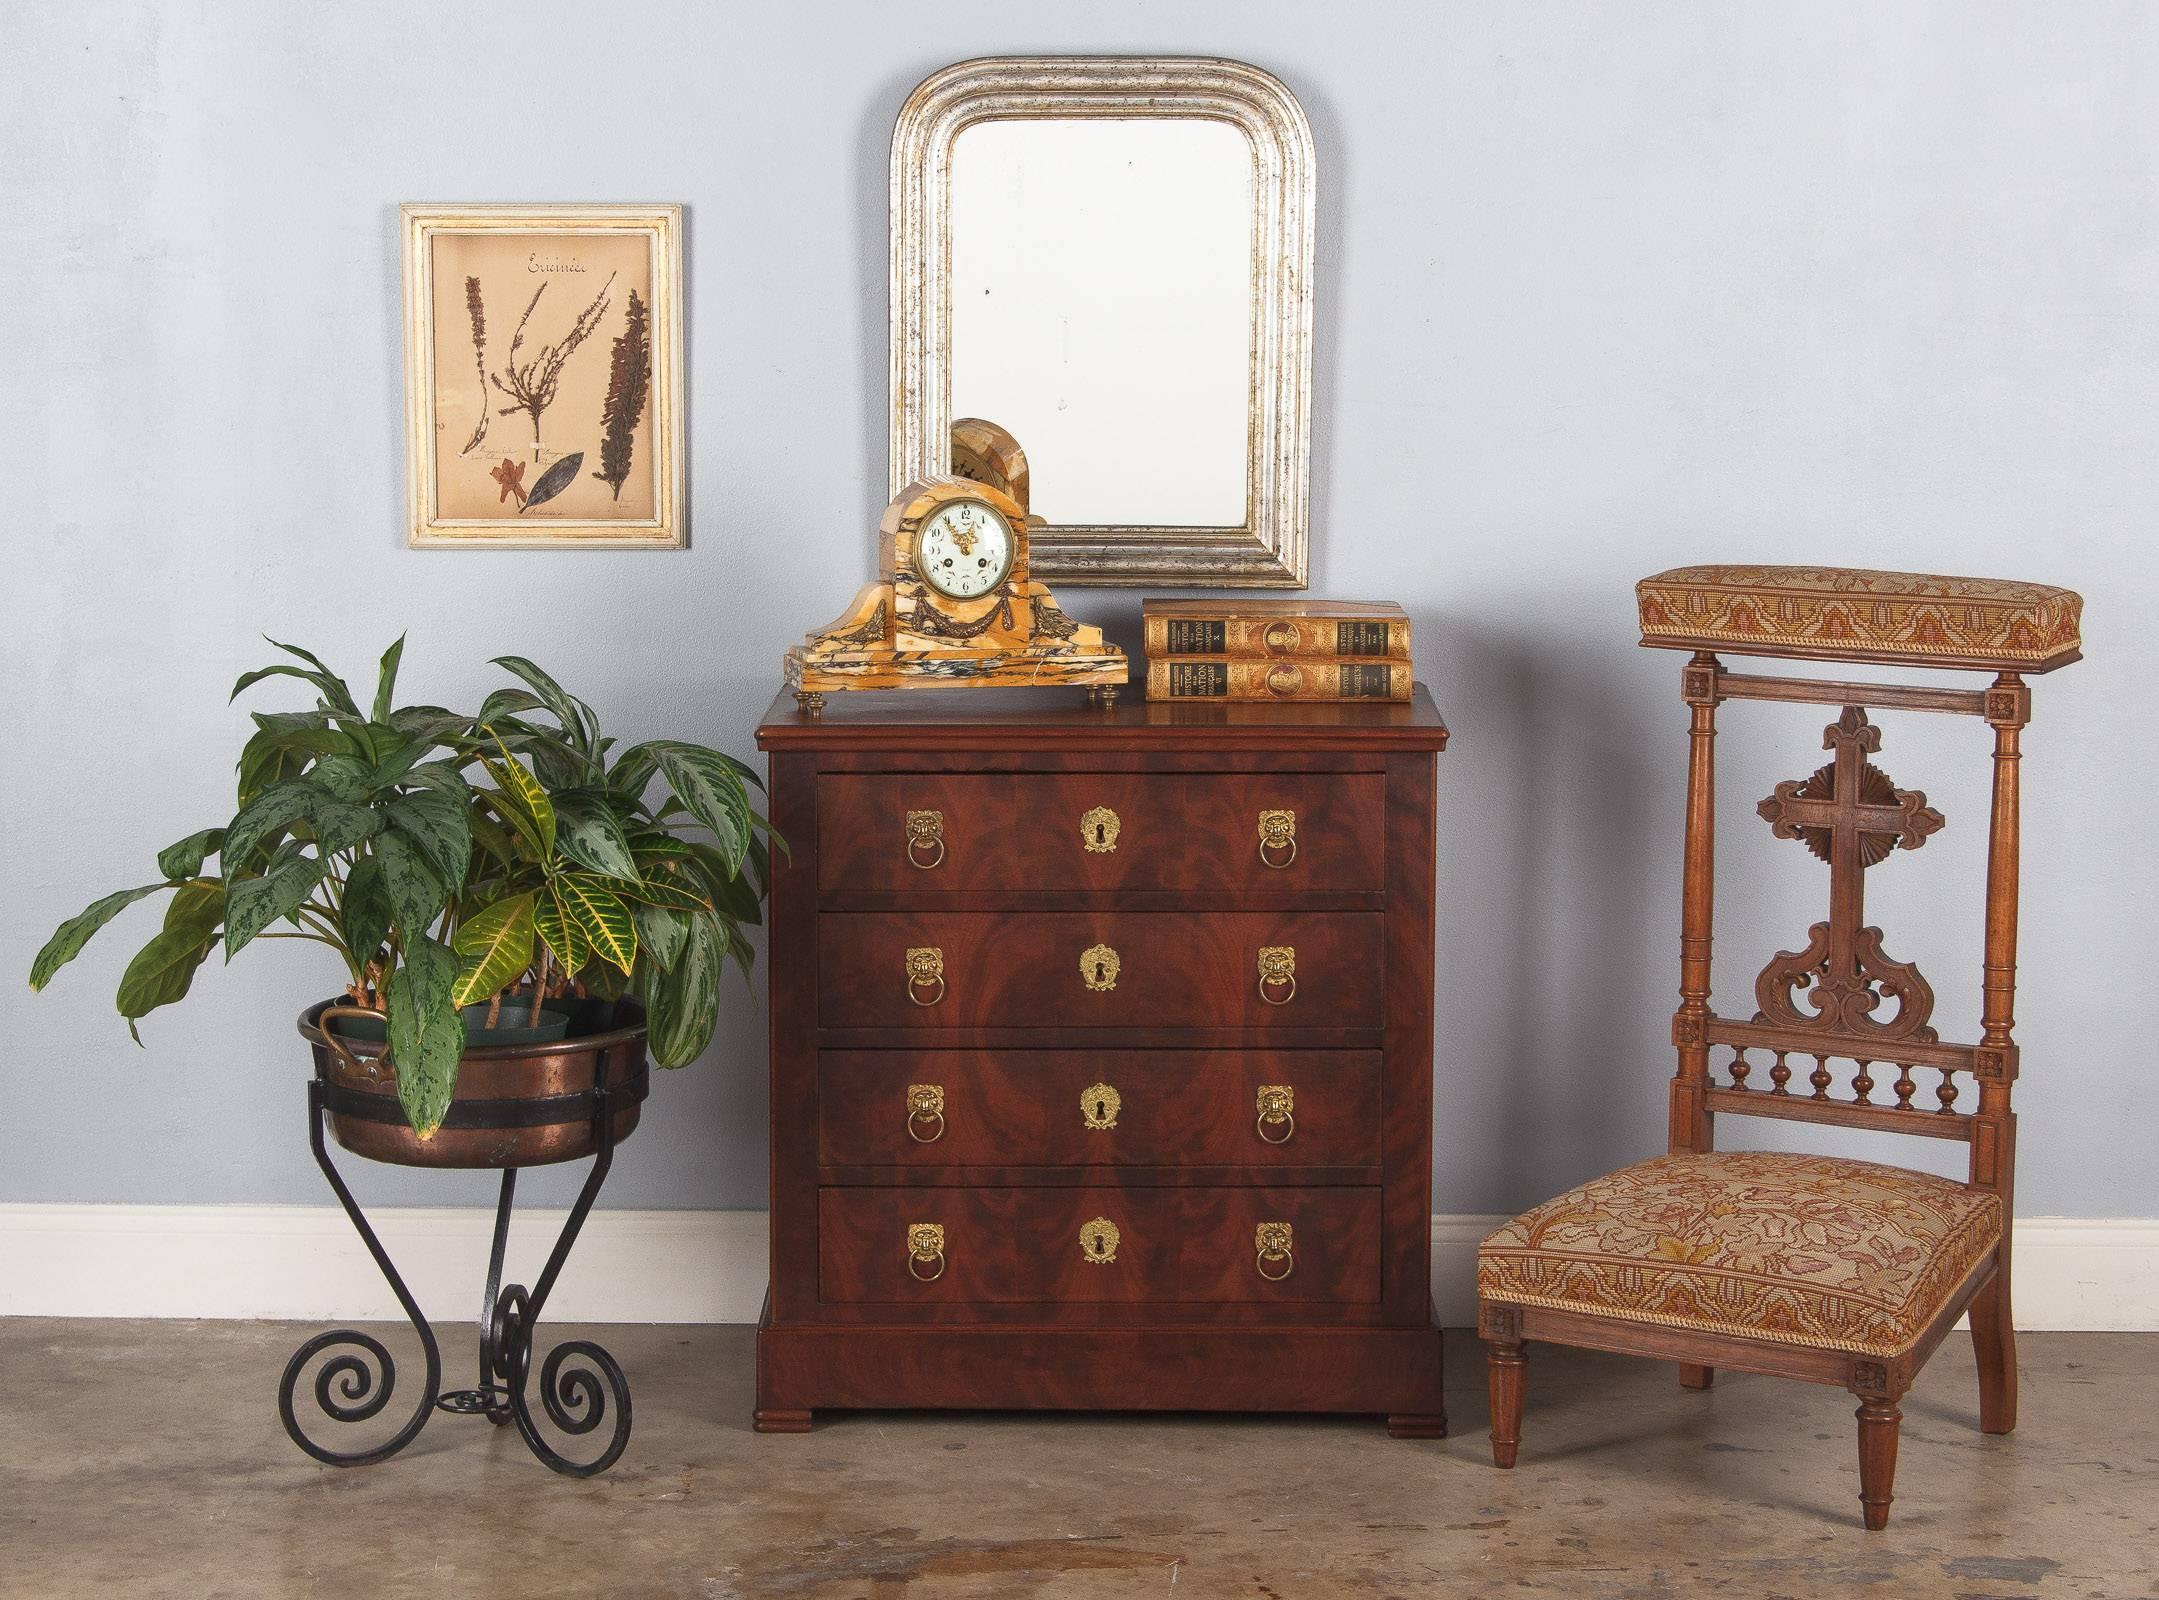 A delightful petite chest of drawers in the French Empire style, circa 1920s. Exquisite flame mahogany veneer creates fantastic visual interest, especially on the top and front of the chest. The commode rests on bracket feet and features four